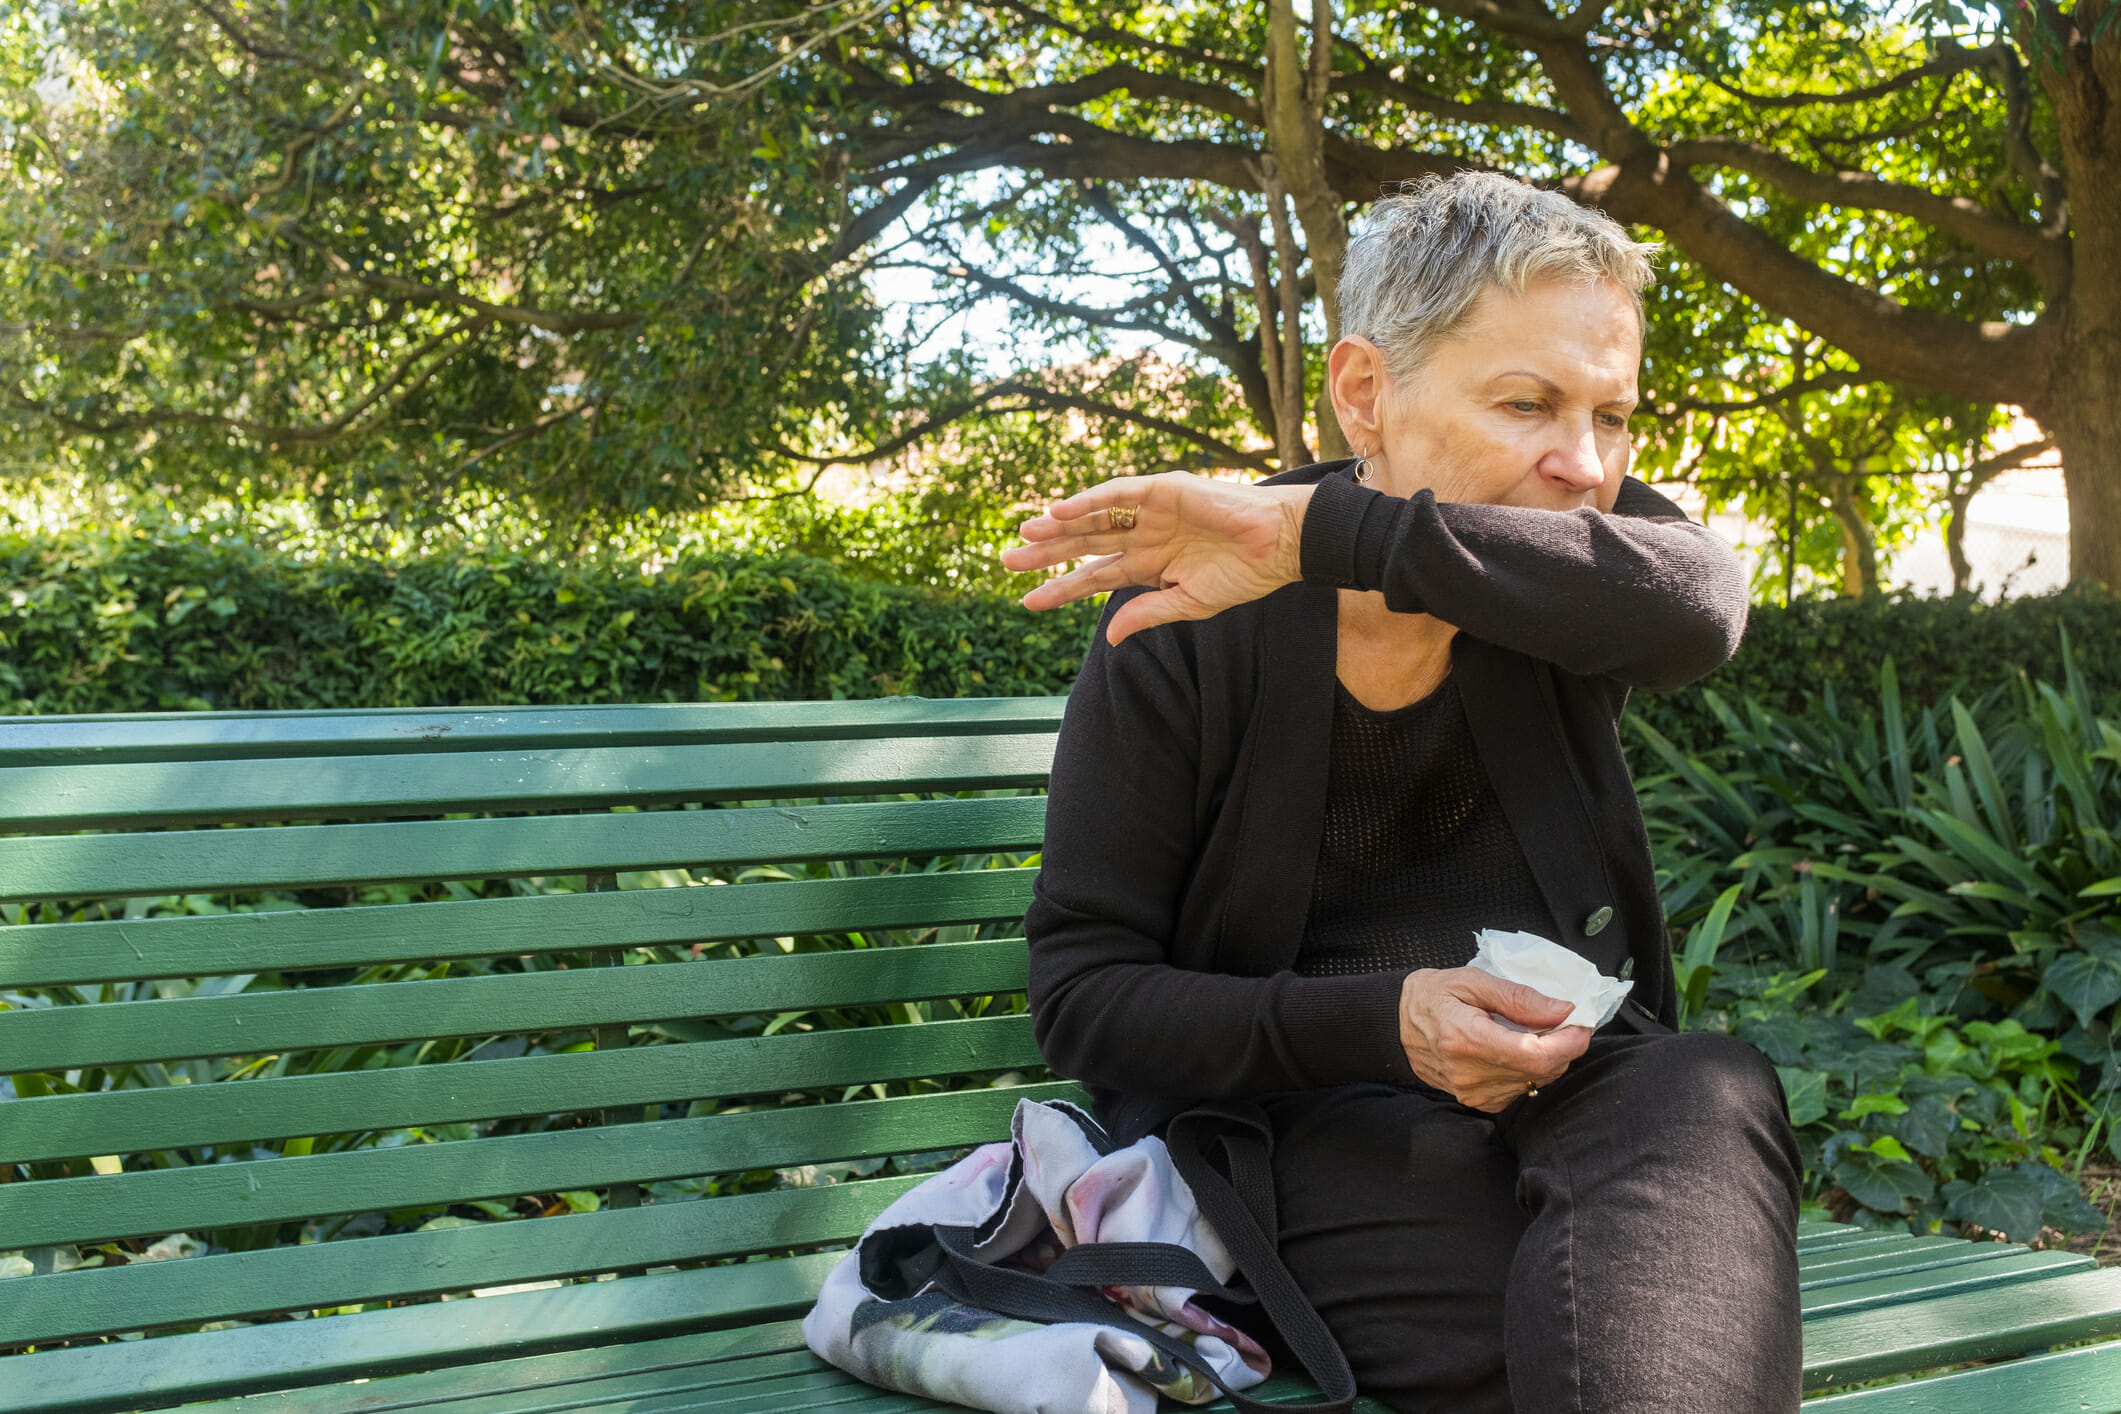 Elderly woman sitting on park bench outdoors coughing into elbow and holding tissue